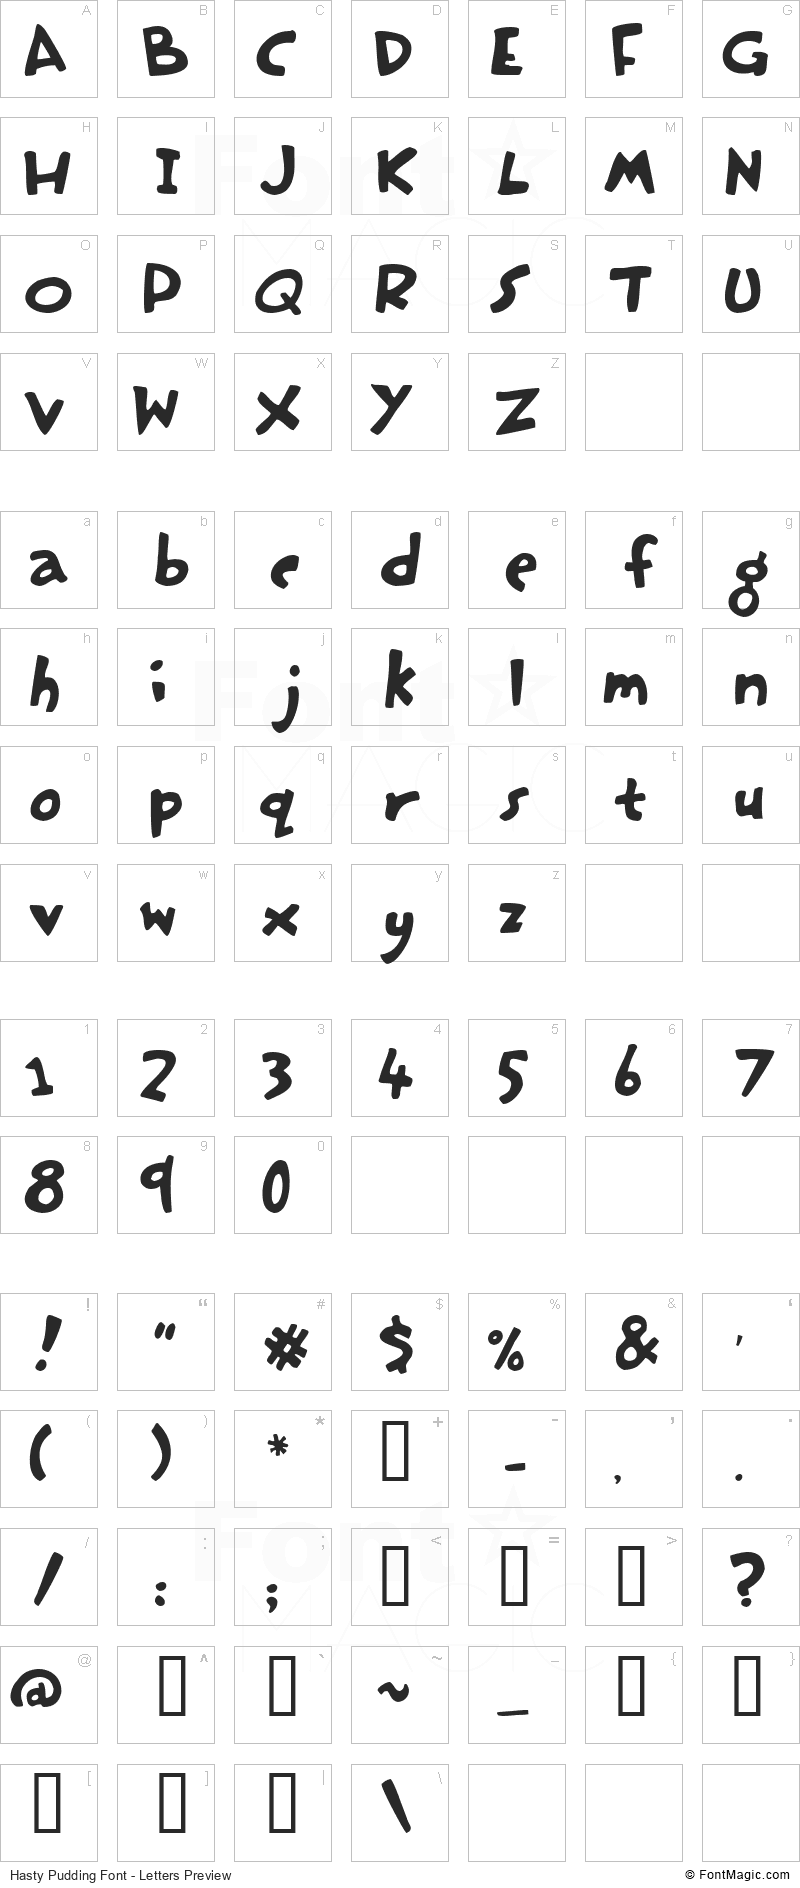 Hasty Pudding Font - All Latters Preview Chart